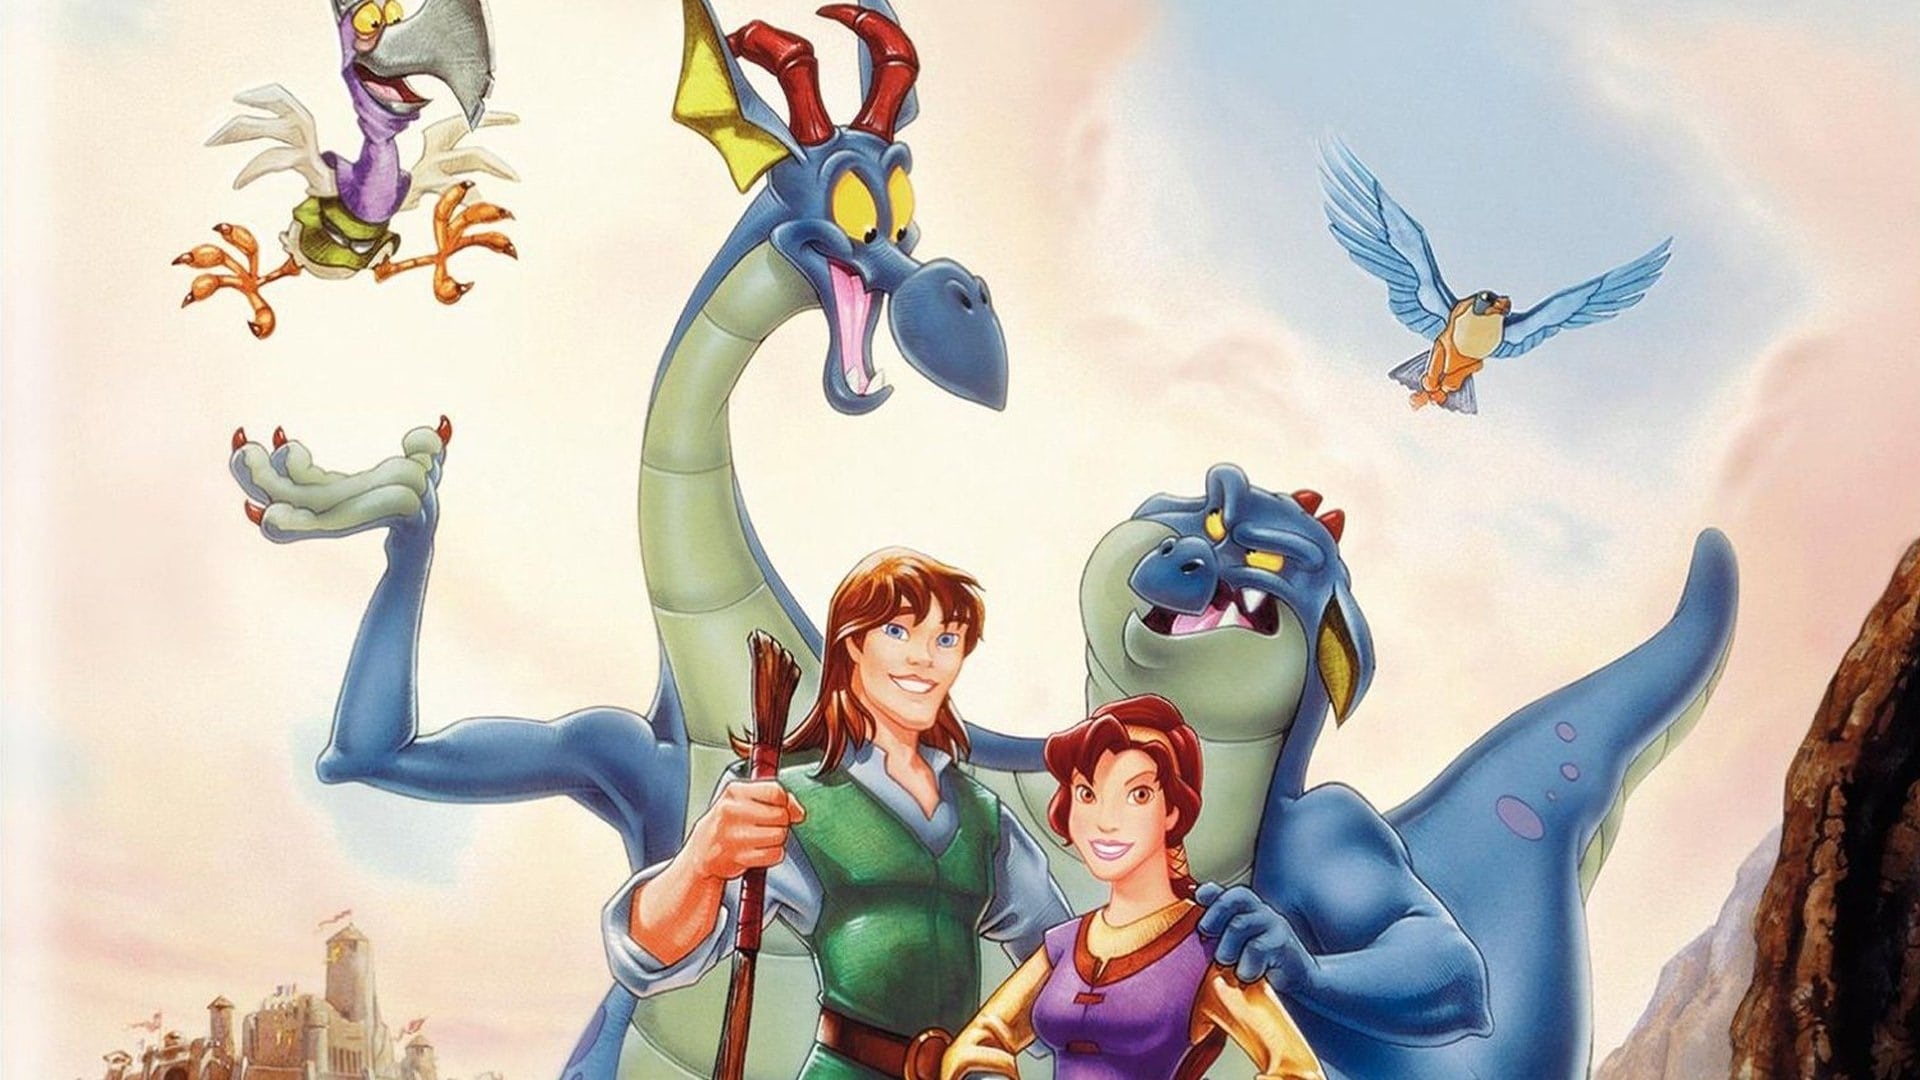 Quest for Camelot 1998 123movies